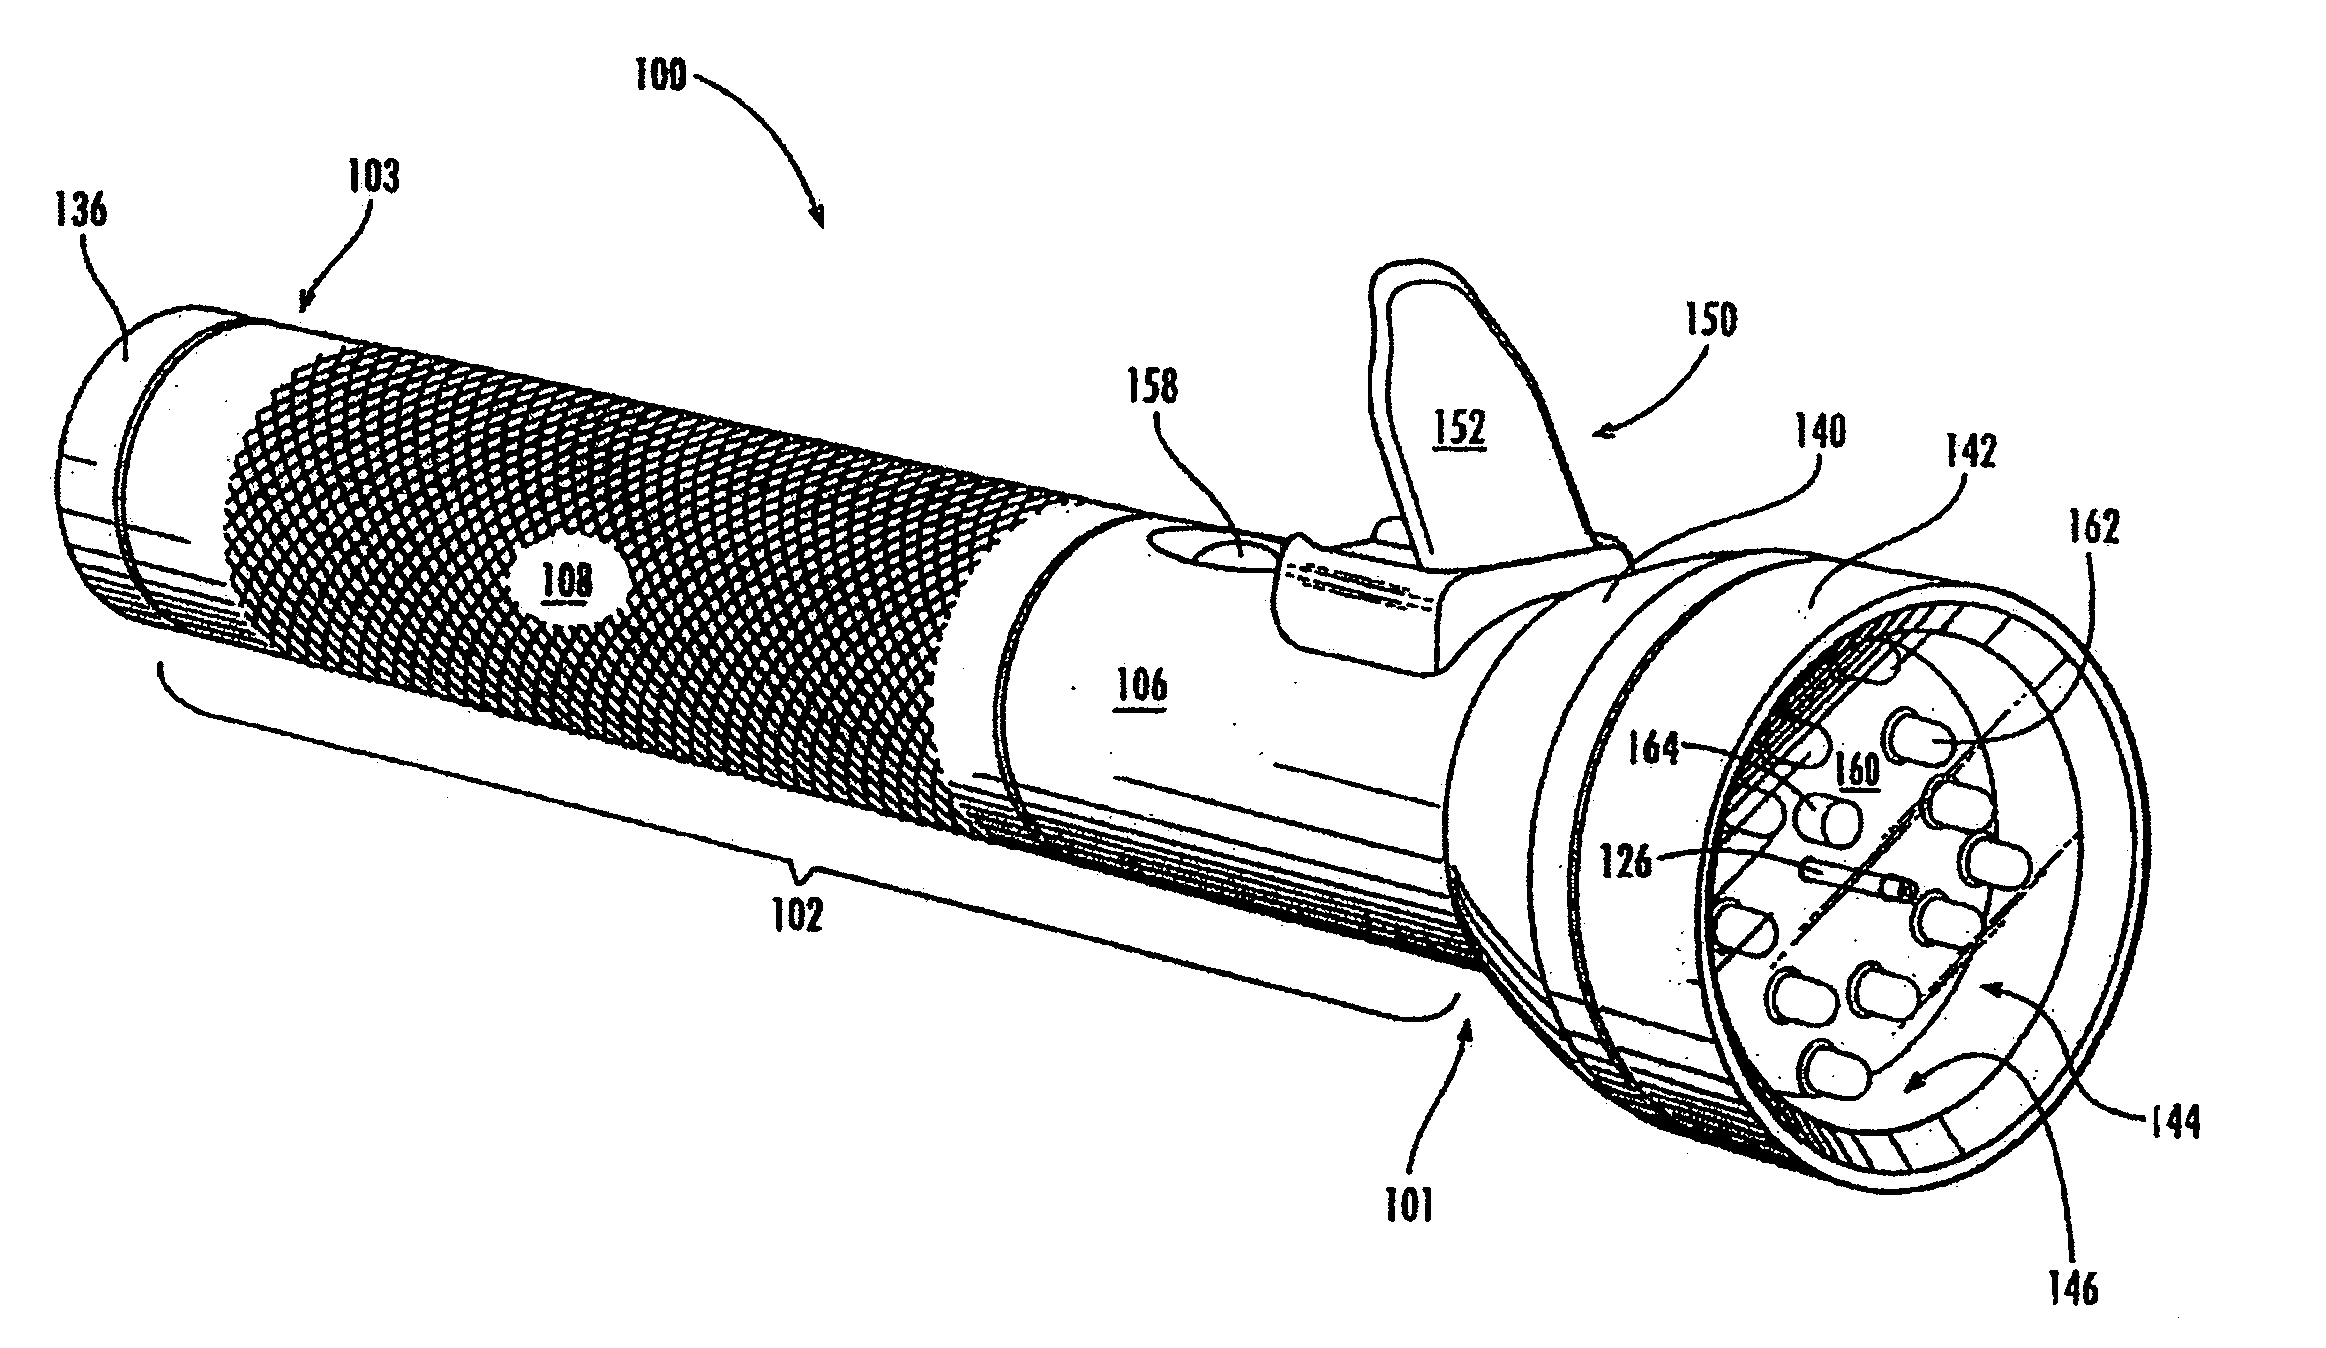 Flashlight and canister interconnection system and method